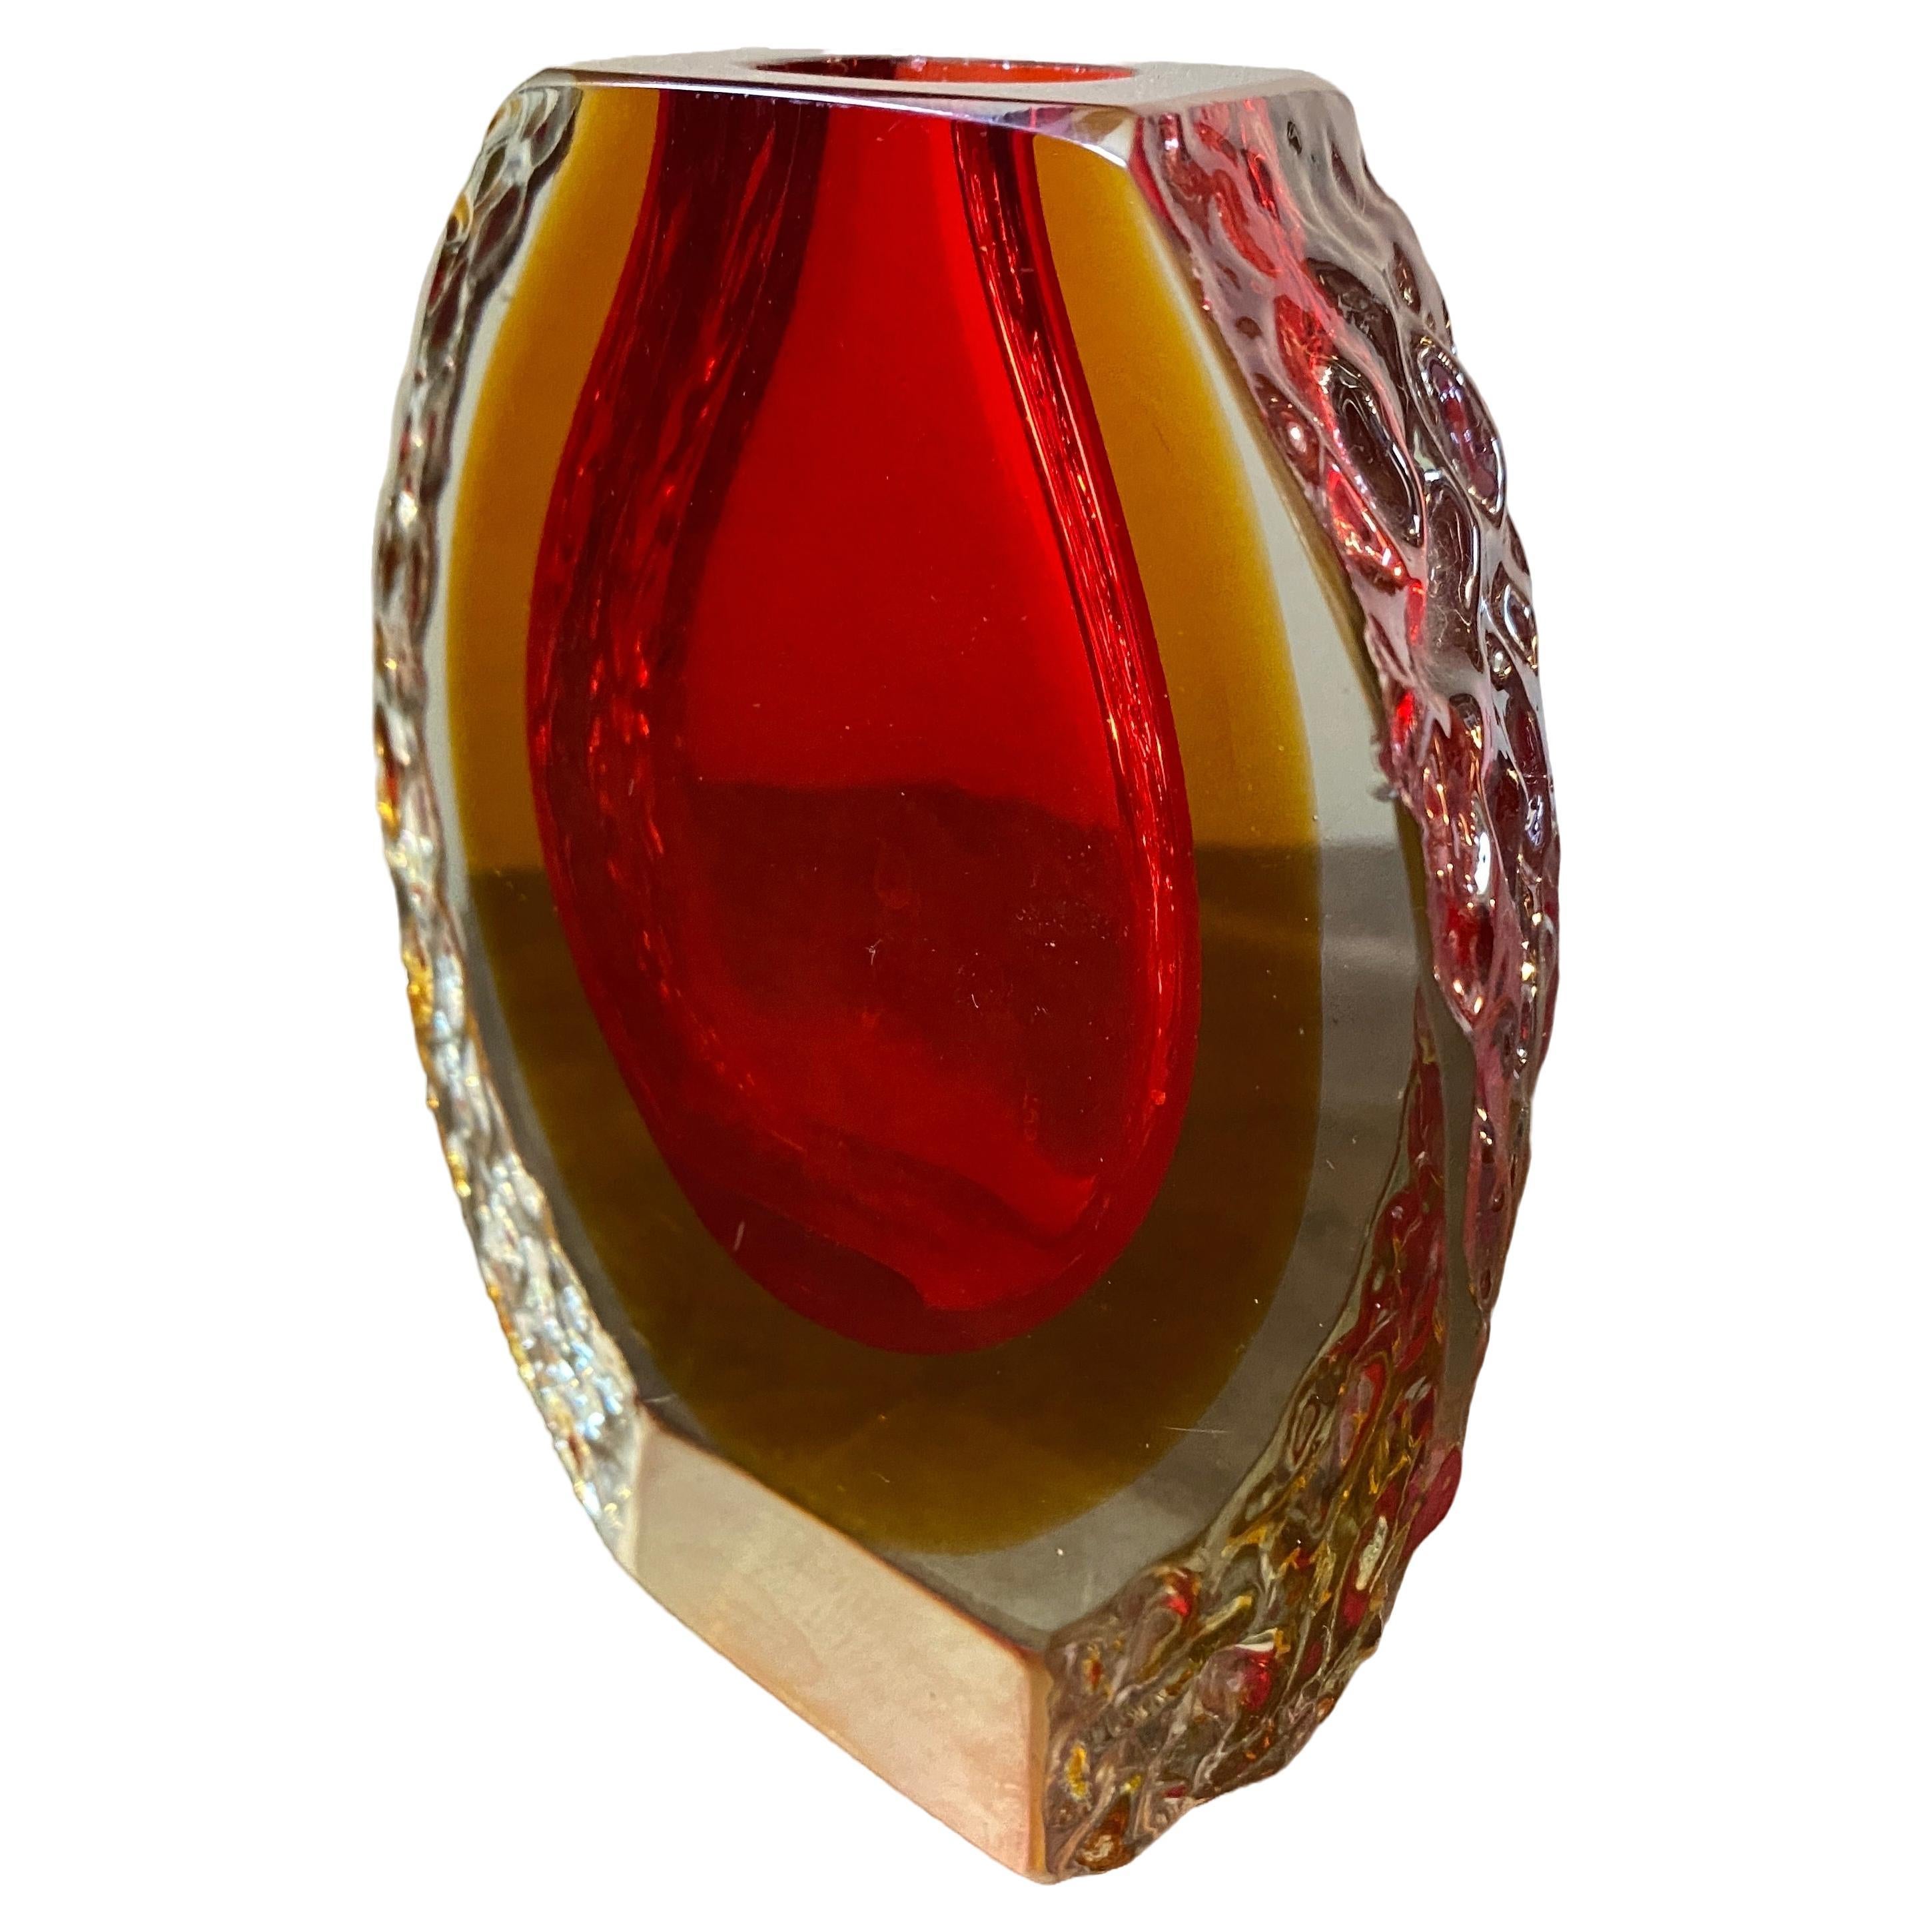 A red and yellow sommerso murano glass vase designed and manufactured in Venice in the Sixties by Mandruzzato in perfect condition. This Vase it's a beautiful fusion of art and function. It features the iconic Sommerso technique, embody the design